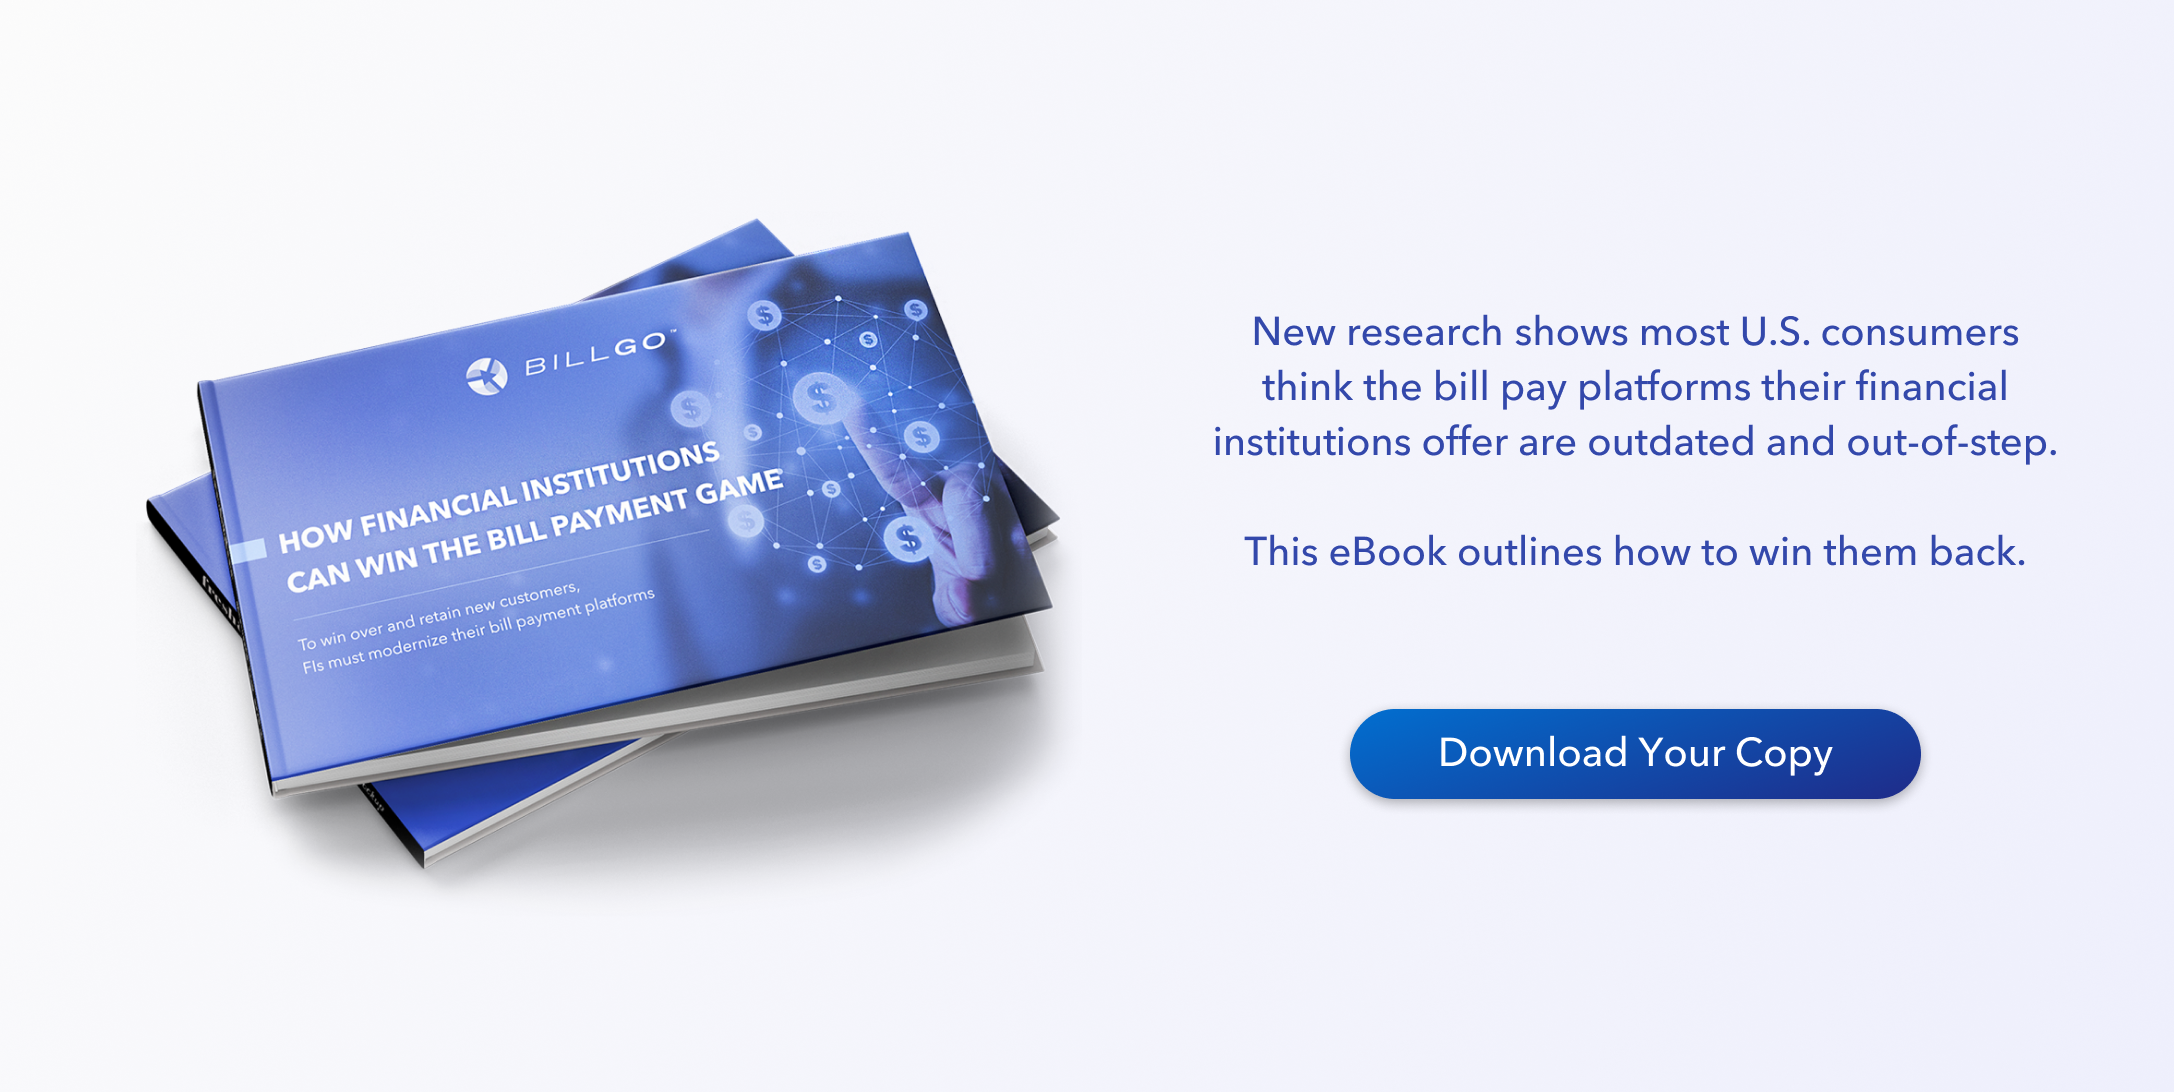 Download your copy: New research shows most U.S. consumers think the bill pay platforms their financial institutions offer are outdated and out-of-step. This eBook outlines how to win them back.